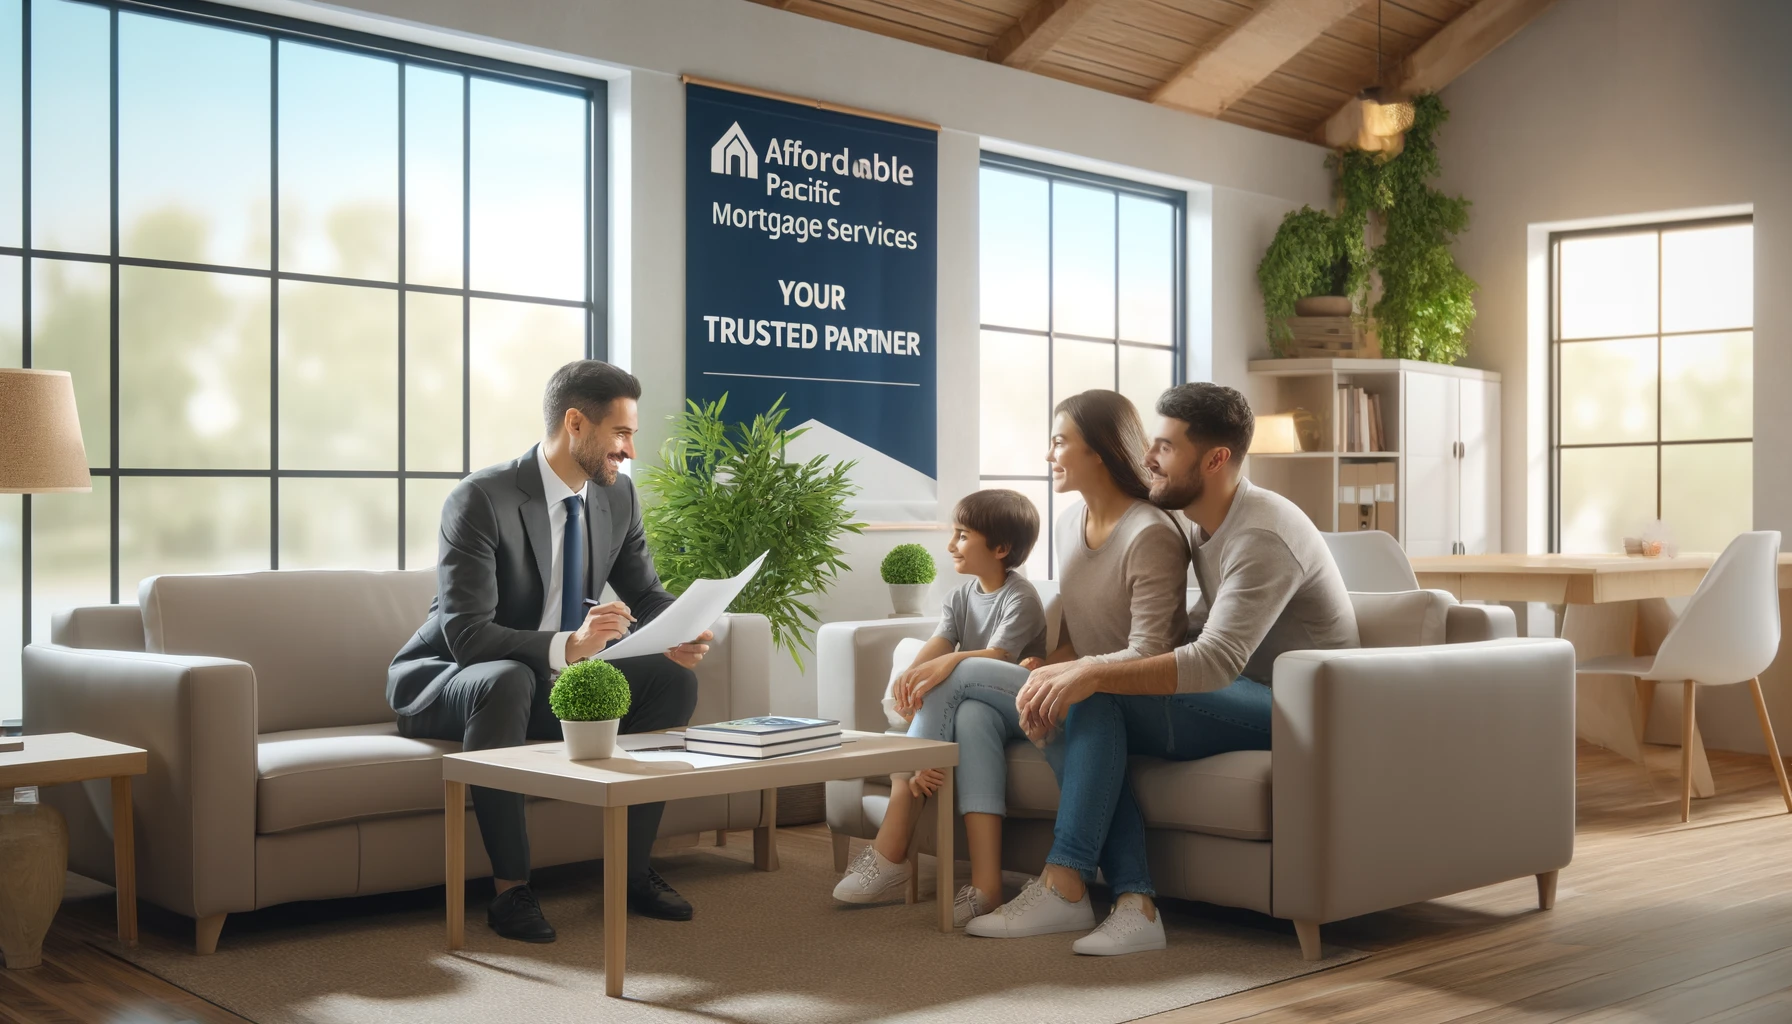 Family meeting with a mortgage advisor in a modern office with a banner reading 'Affordable Pacific Mortgage Services | Your Trusted Partner.'